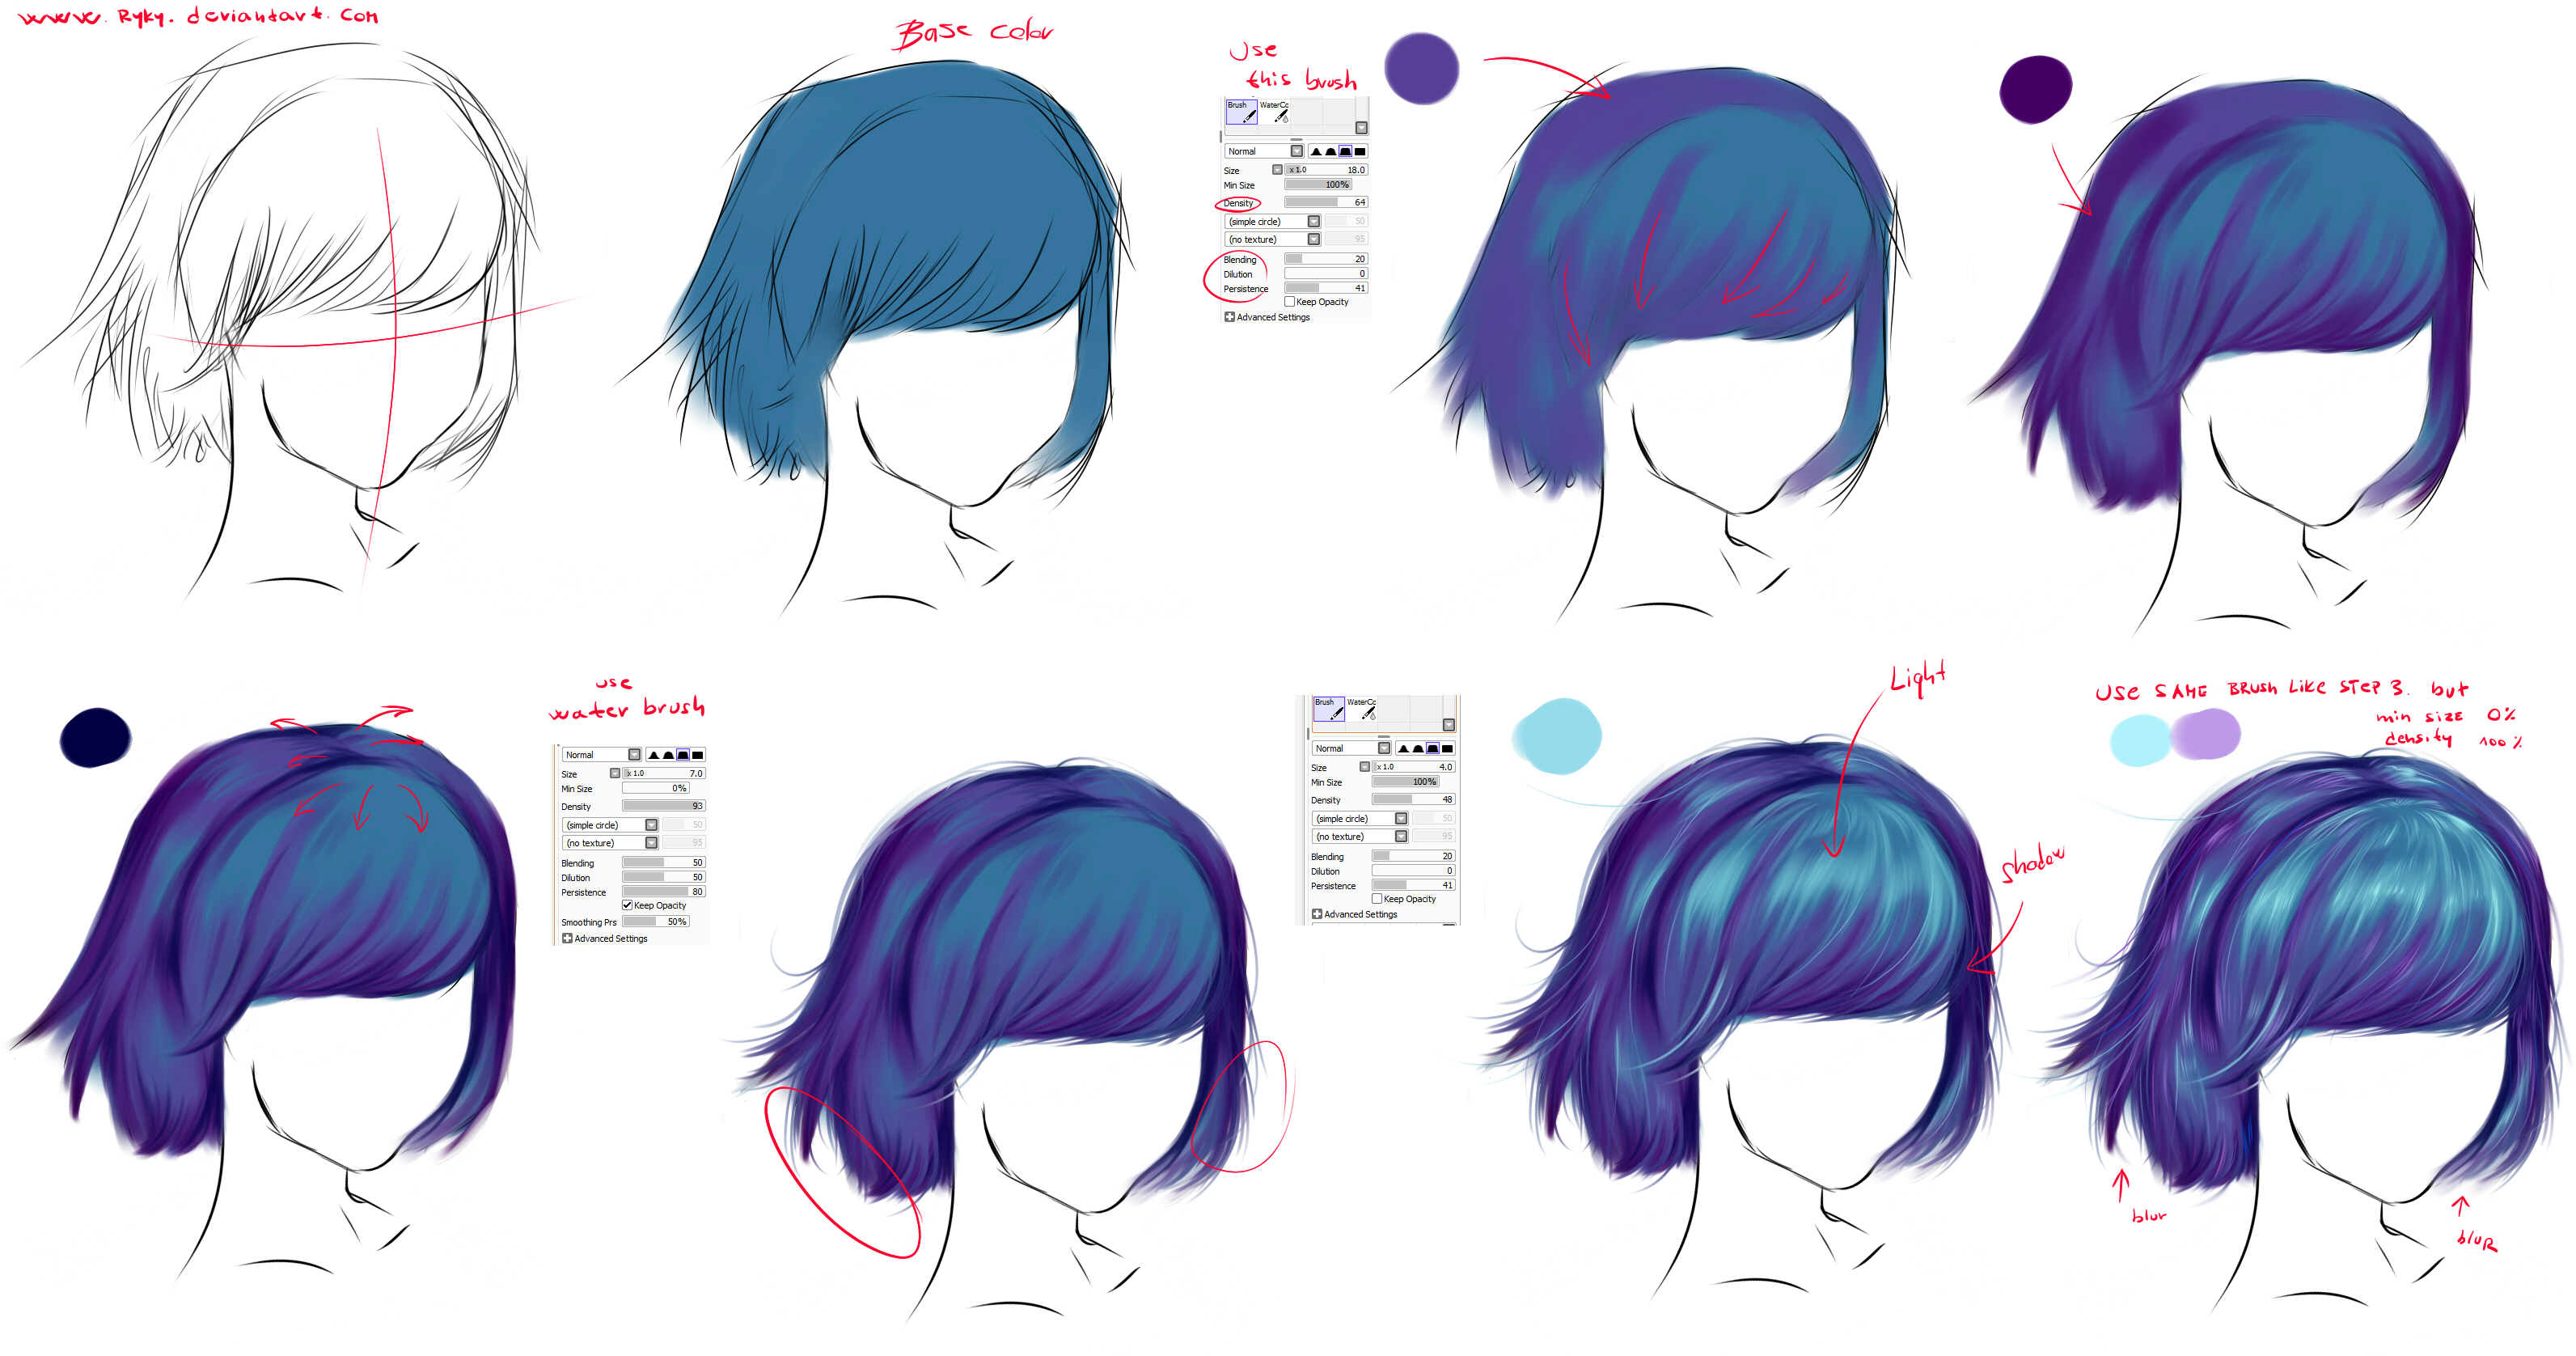 How to draw - hair by ryky on DeviantArt